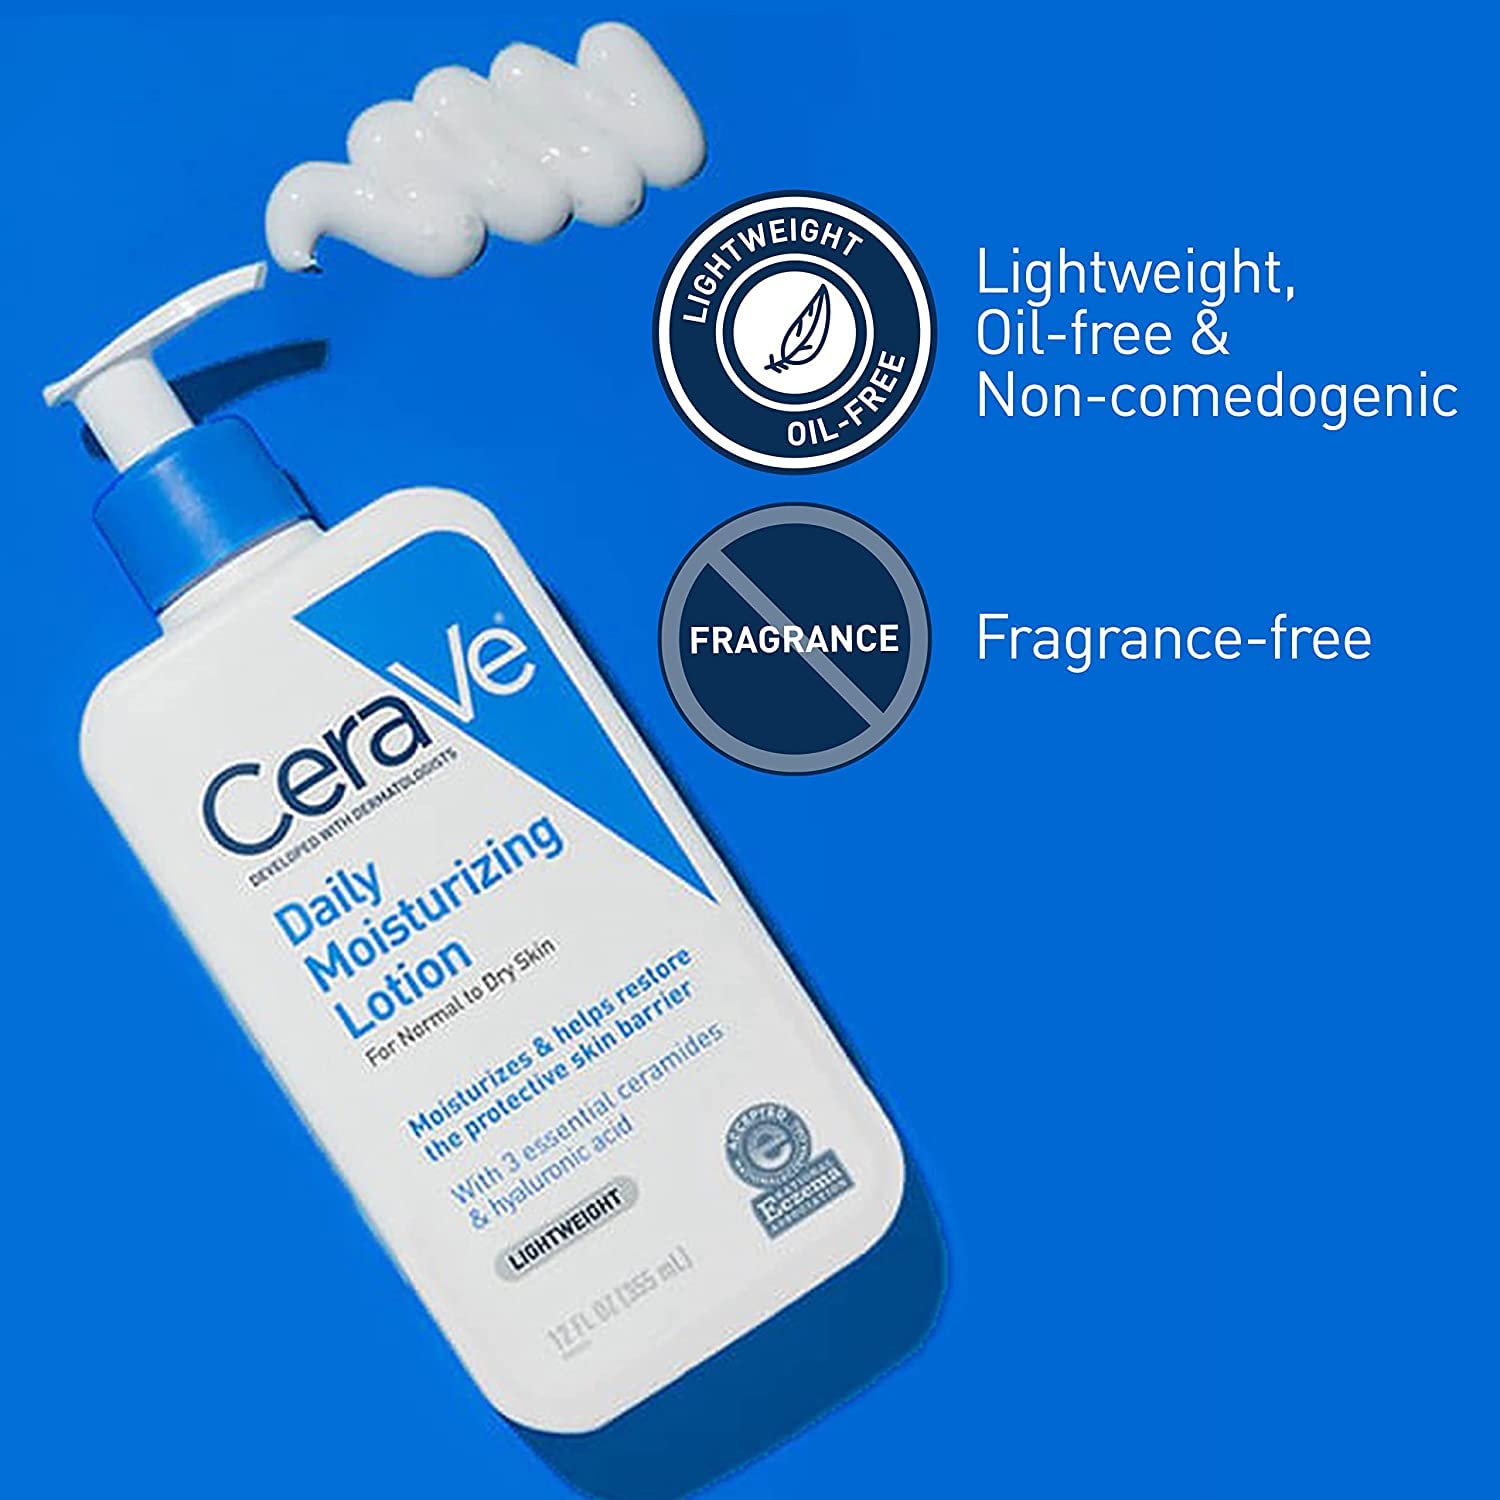 Wholesale prices with free shipping all over United States CeraVe Daily Moisturizing Lotion for Dry Skin | Body Lotion & Facial Moisturizer with Hyaluronic Acid and Ceramides | Fragrance Free | 19 Ounce - Steven Deals